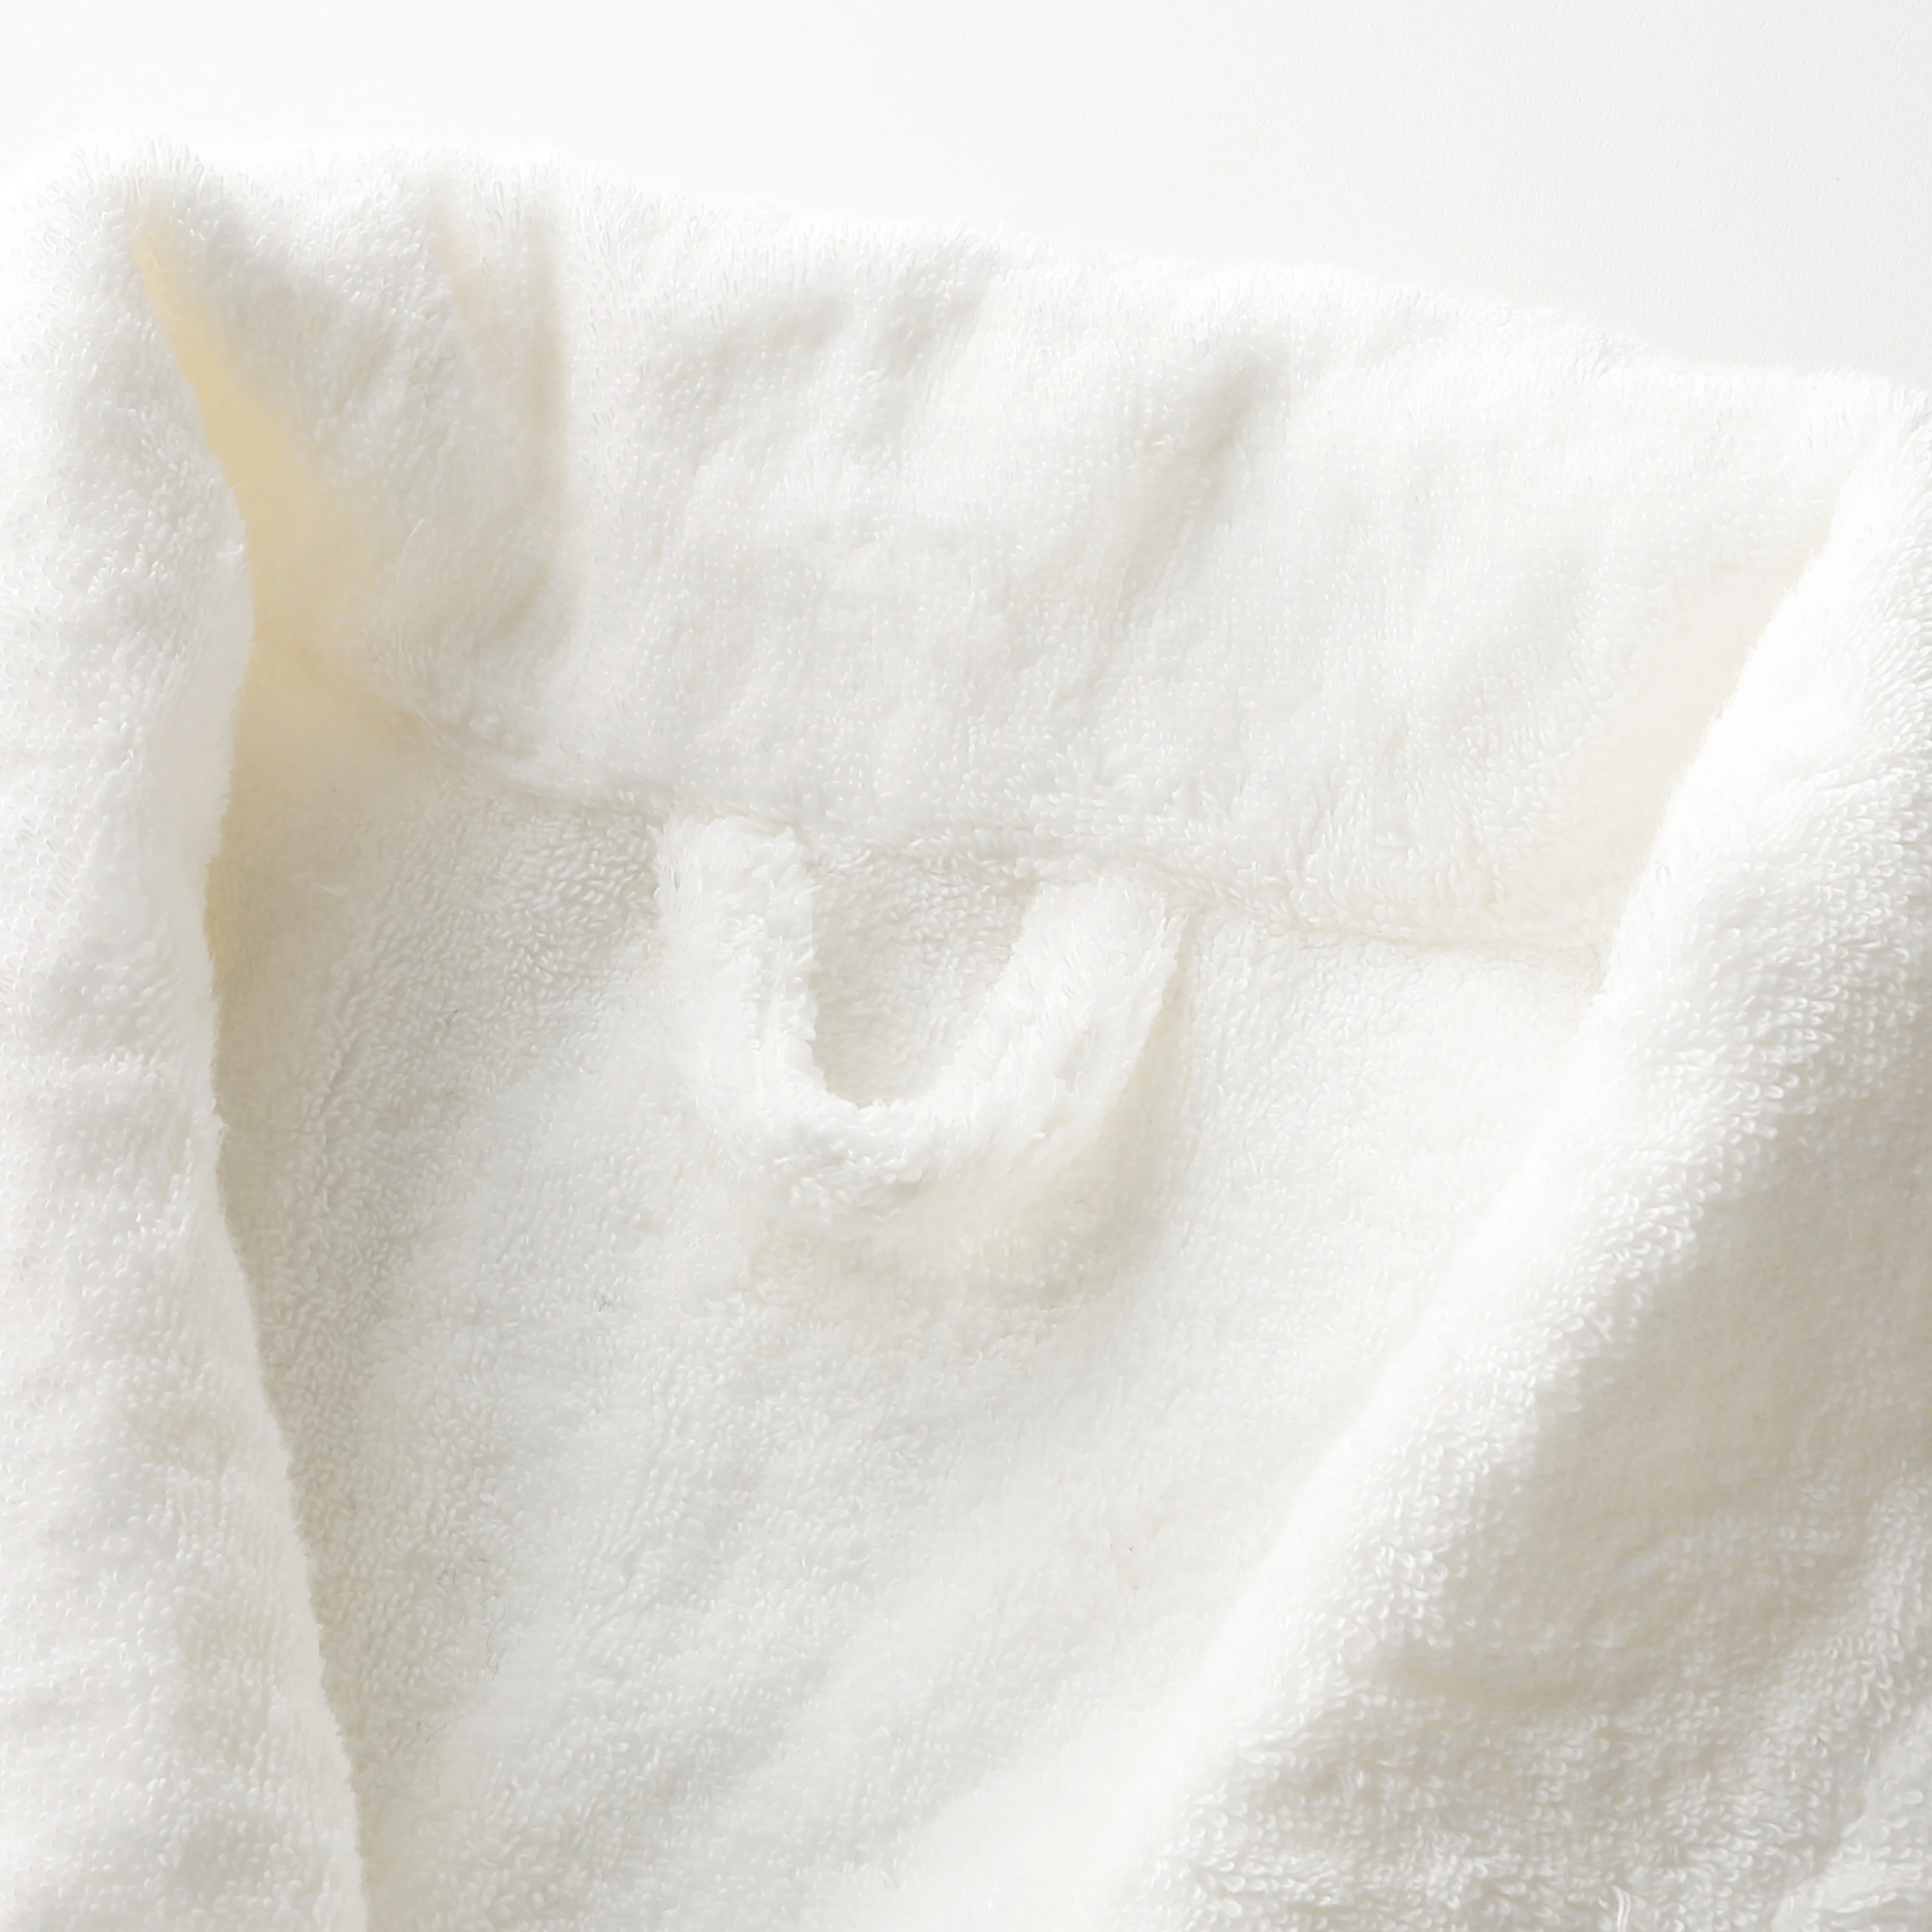 100% Certified-Organic Cotton Quality Bathrobes For Men And Boys